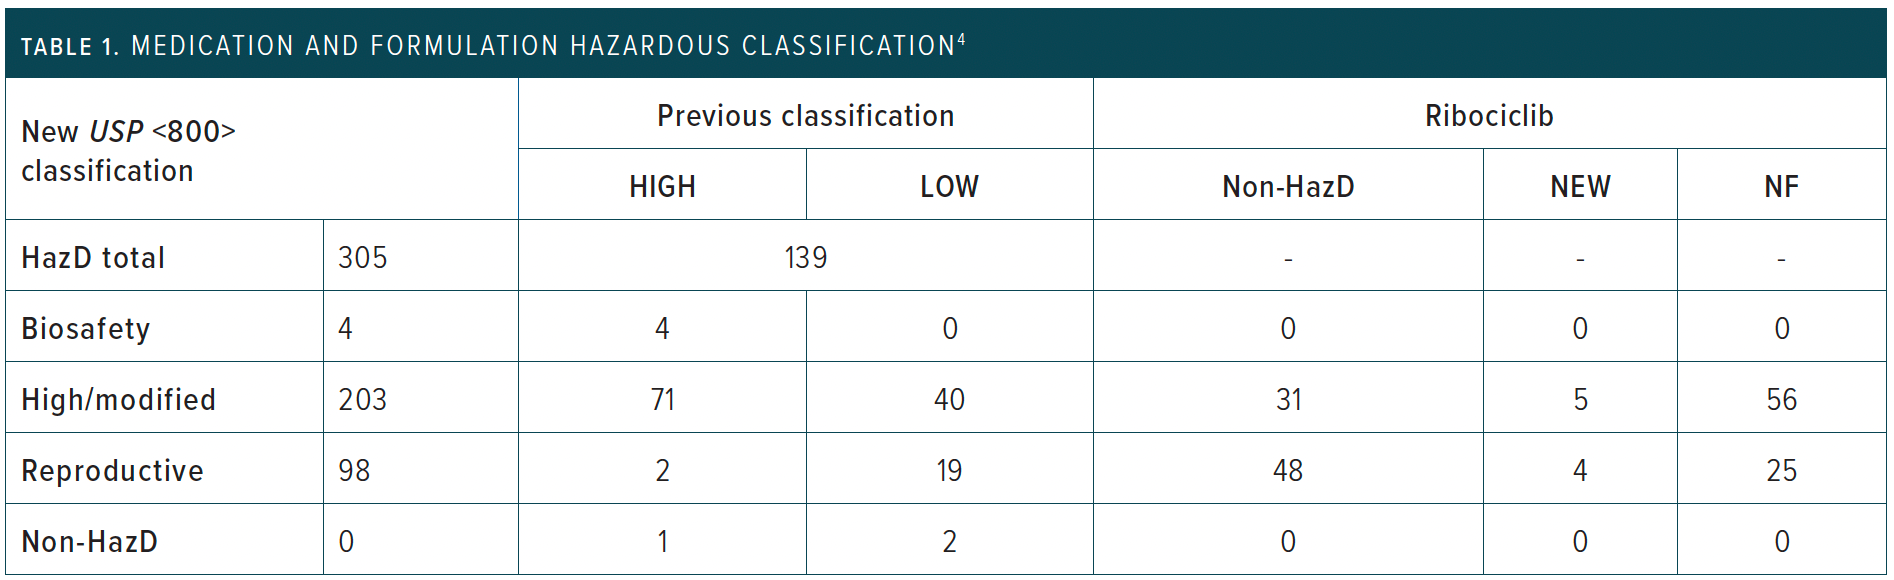 Table 1: Medication and forumlation hazardous classification -- HazD, hazardous drug; new, new to market since the previous classification; NF, not evaluated due to nonformulary status; USP, United States Pharmacopeia.